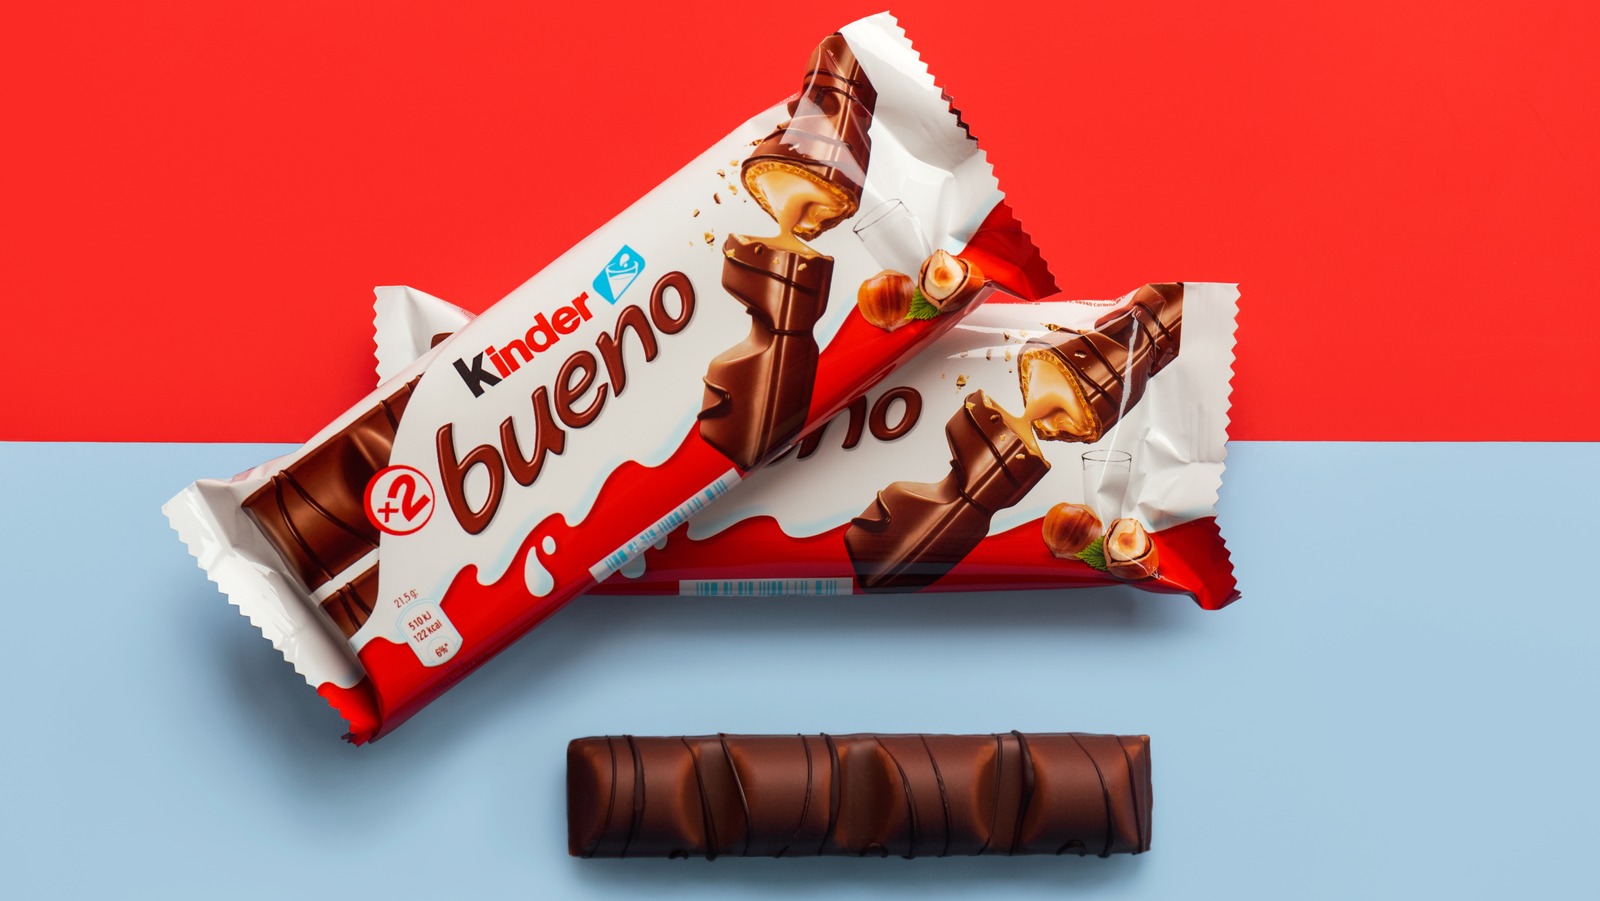 What You Need To Know About Kinder Chocolates Recall